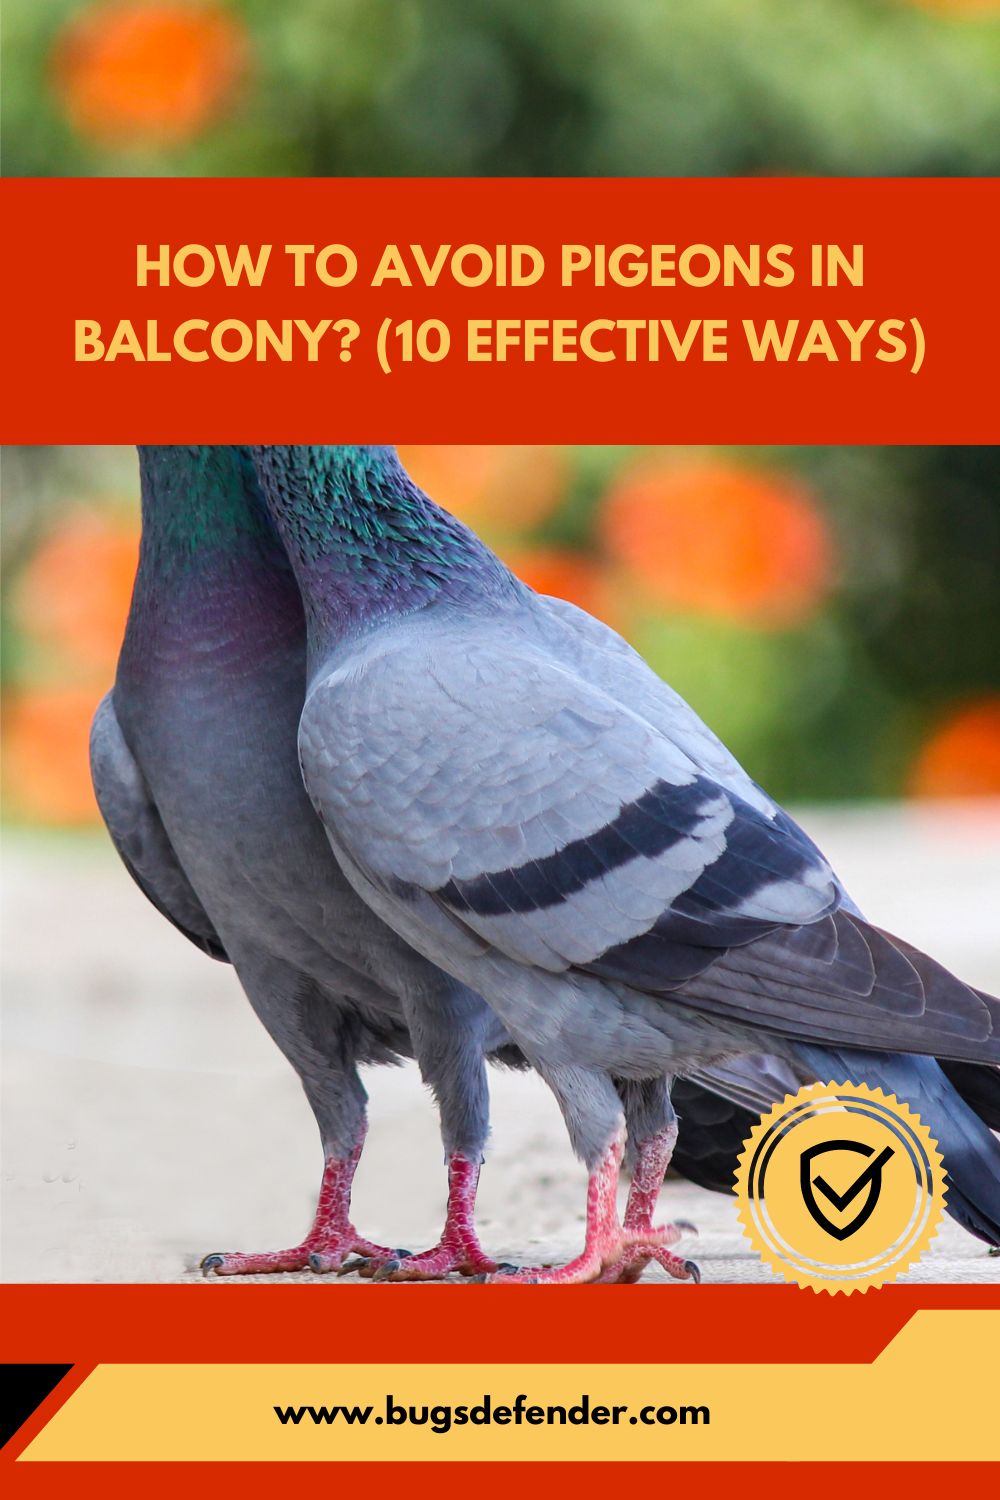 How To Avoid Pigeons In Balcony (10 Effective Ways) pin2